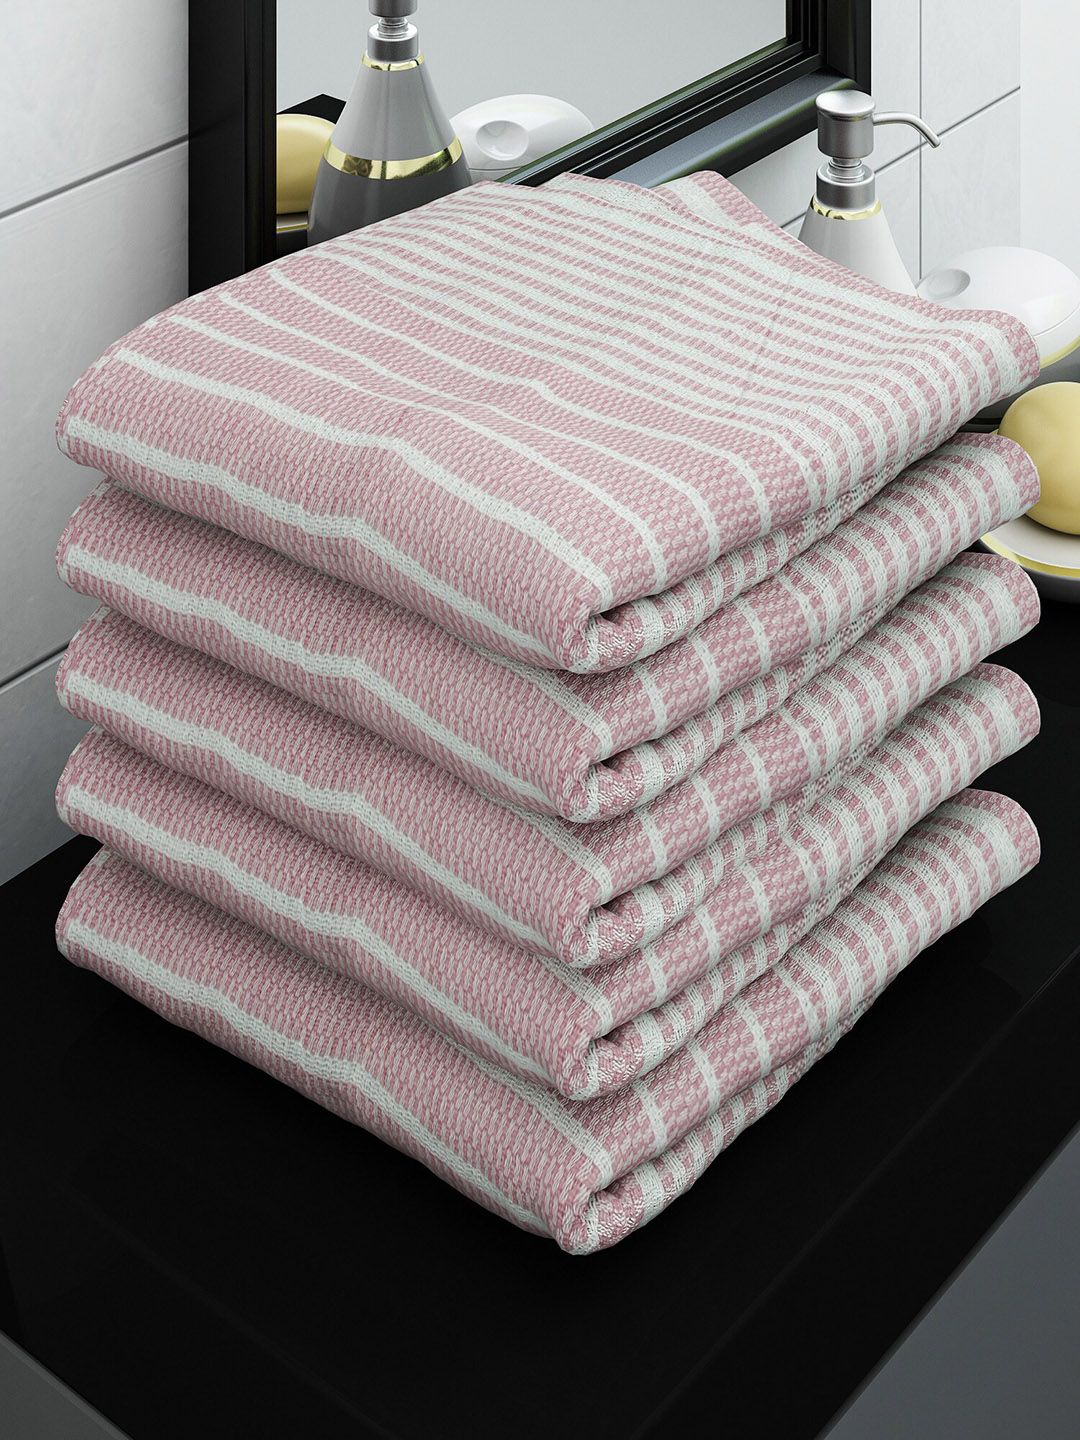 Athom Trendz Pack of 5 Pink Striped 210 GSM Cotton Bath Towels Price in India